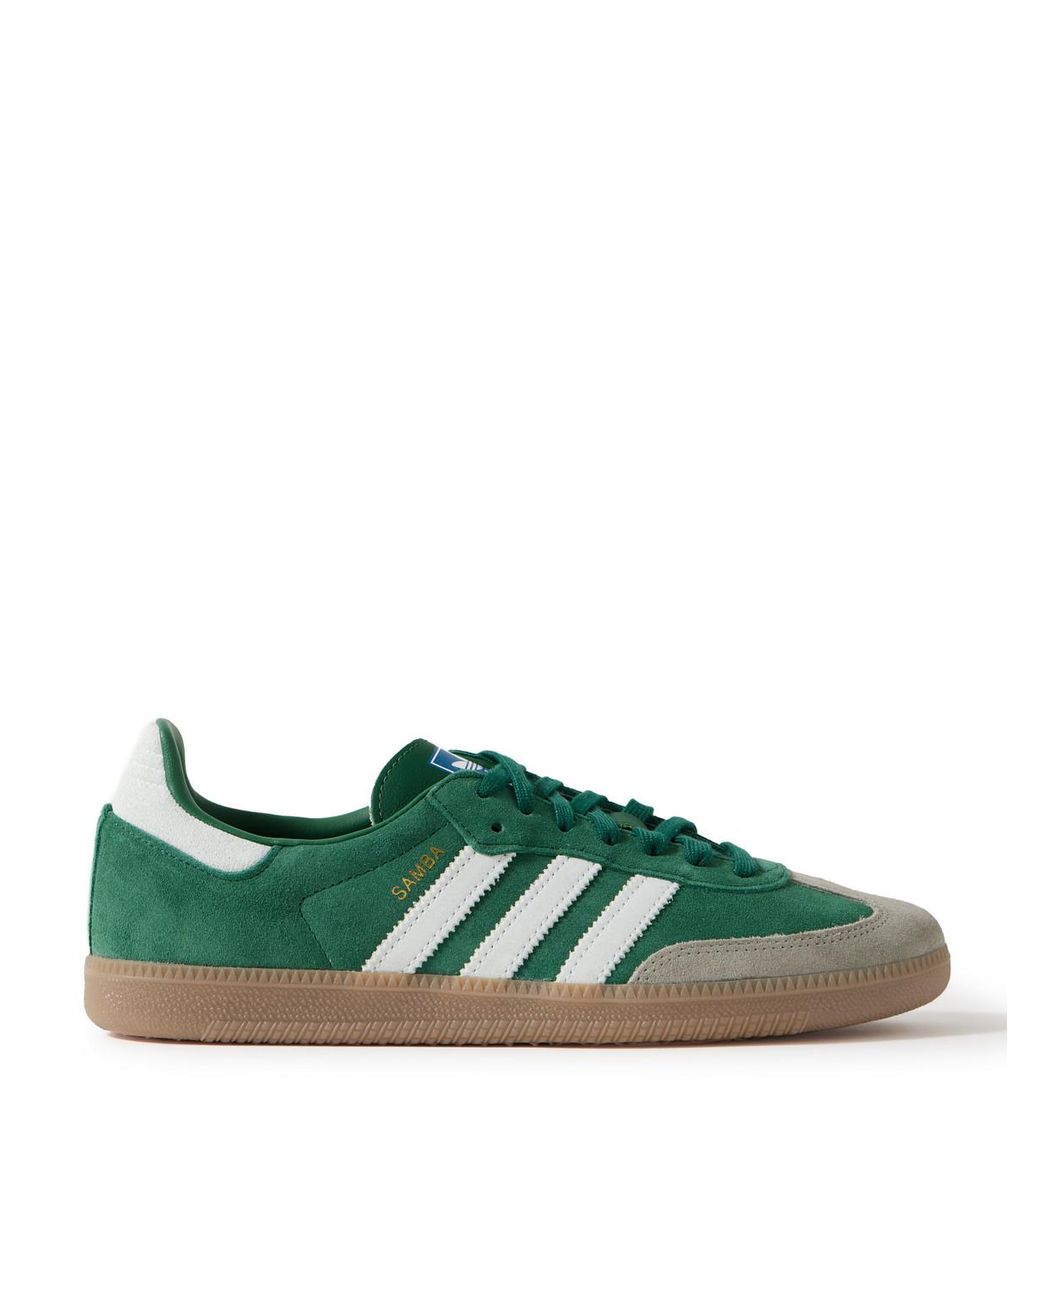 adidas Originals Samba Og Leather-trimmed Suede Sneakers in Green for ...